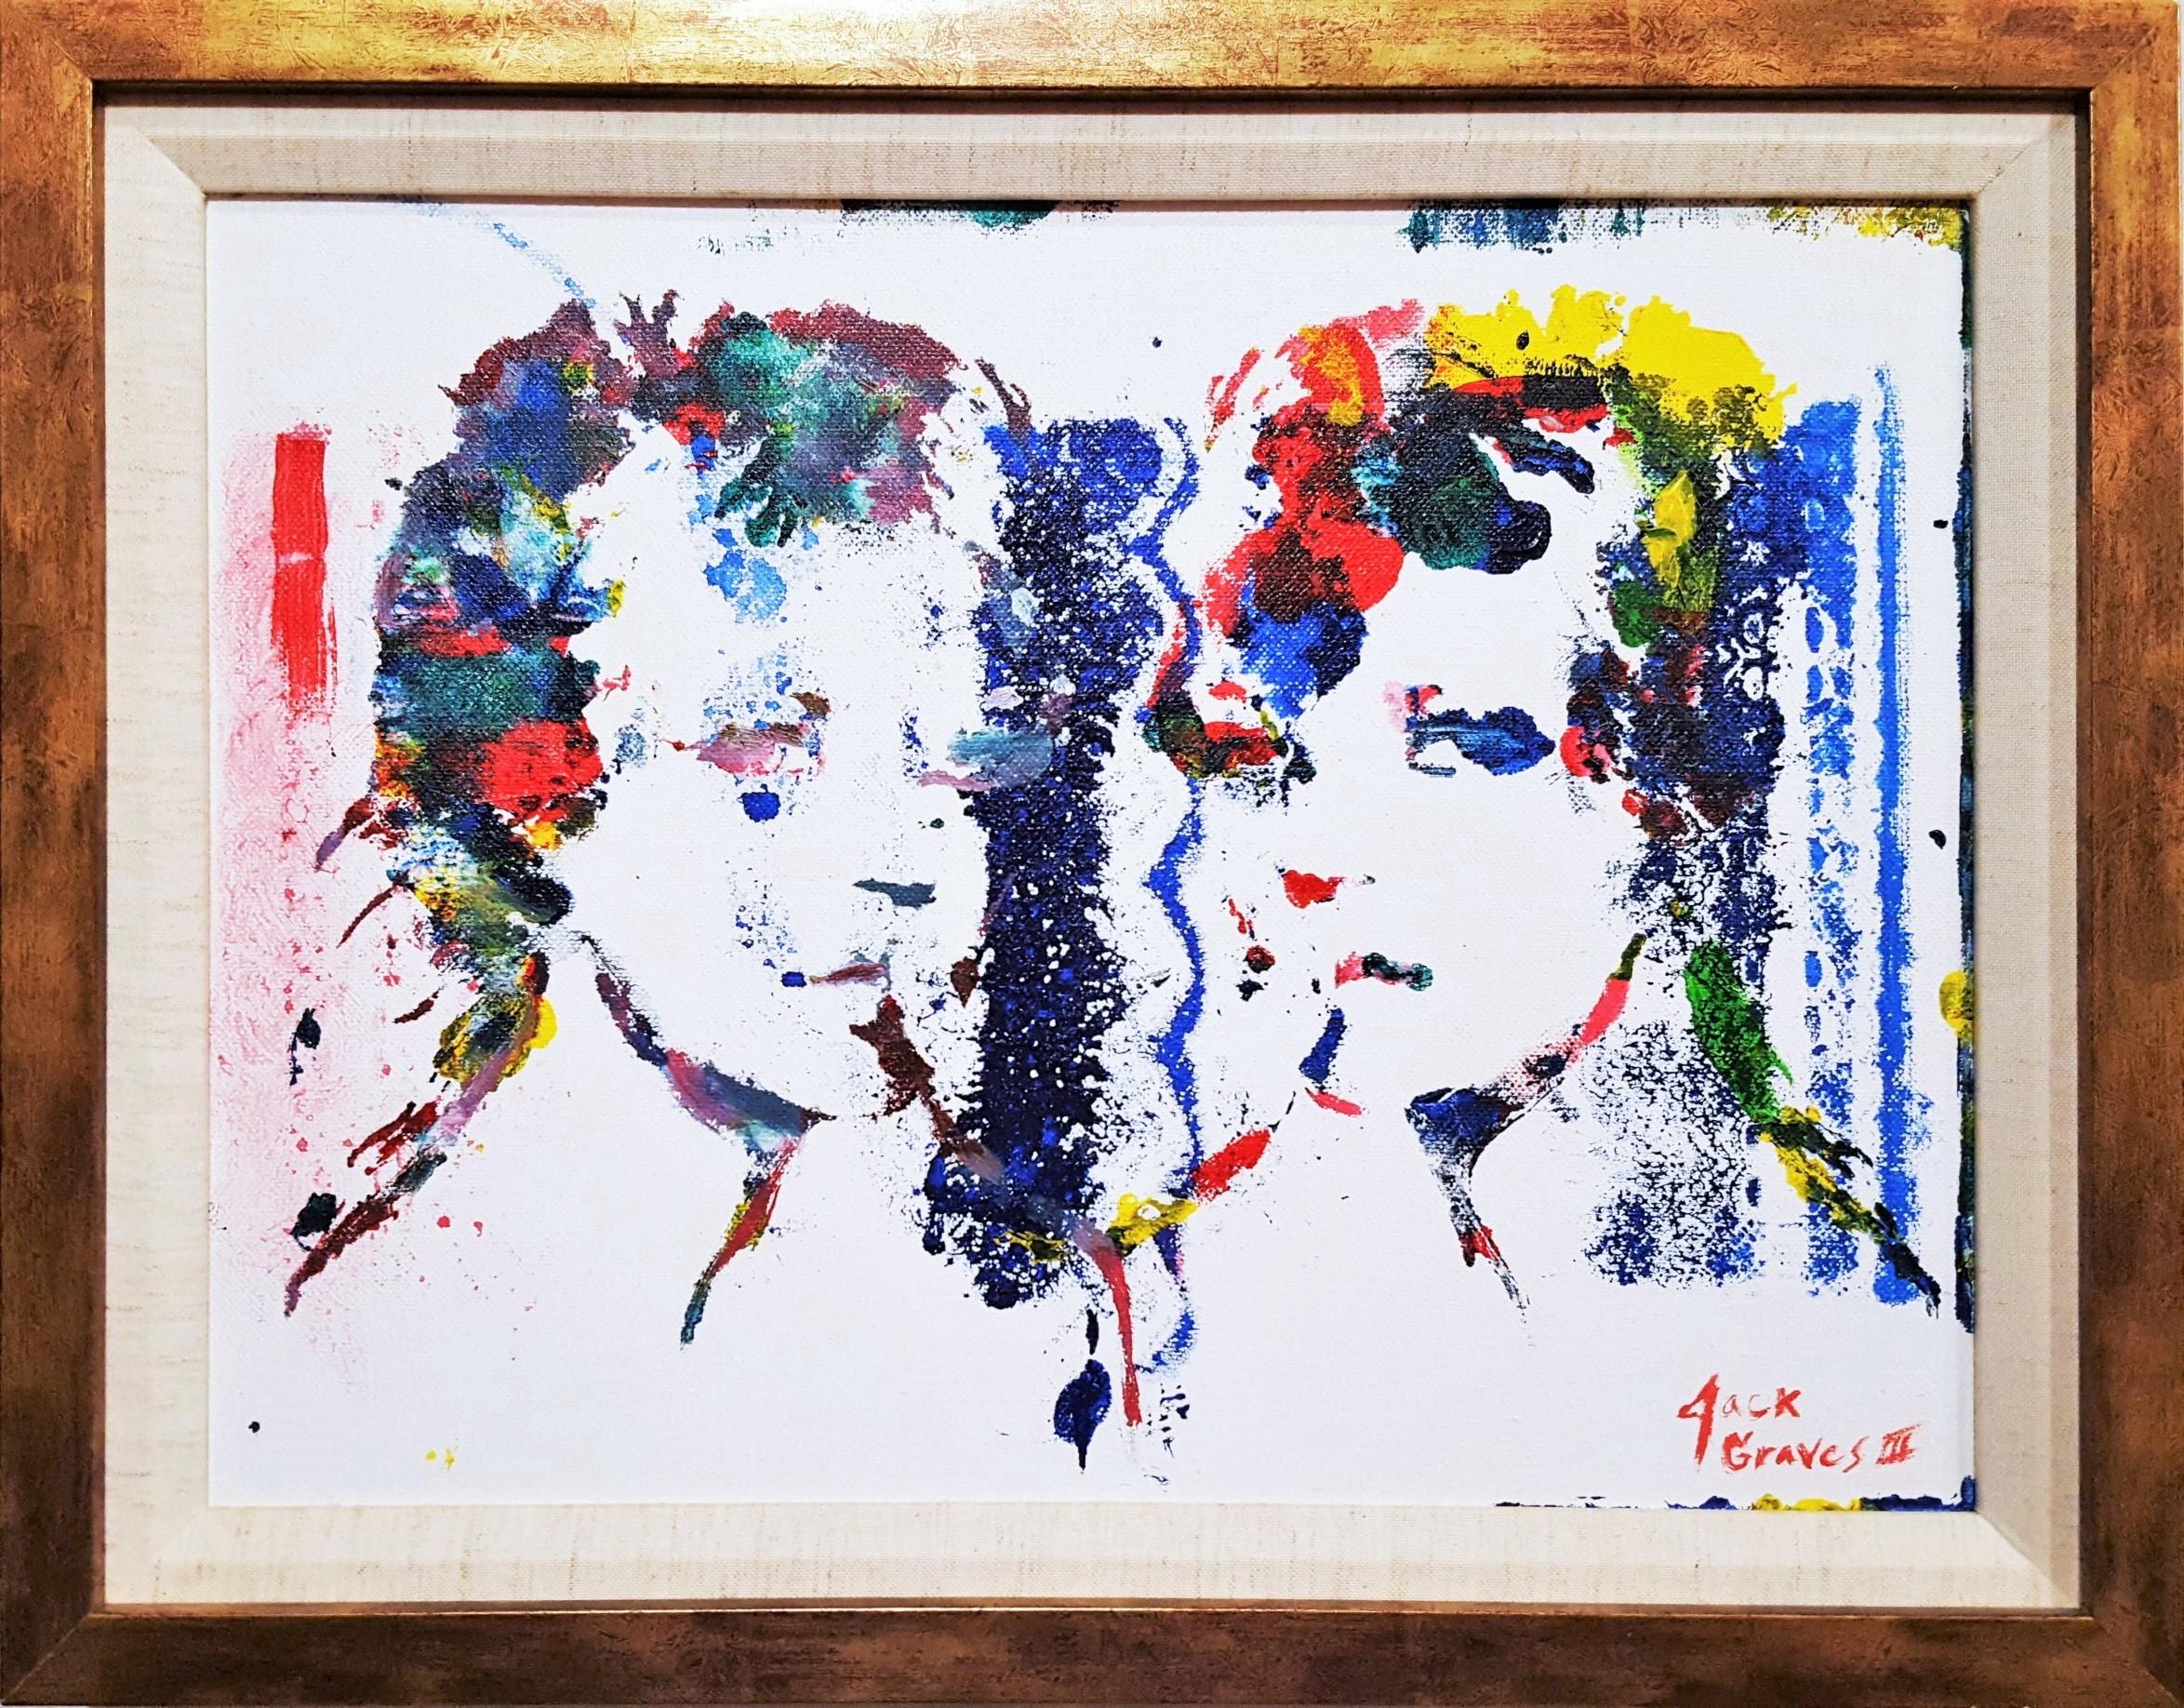 2XKM (Two Times Kate Moss) - Painting by Jack Graves III